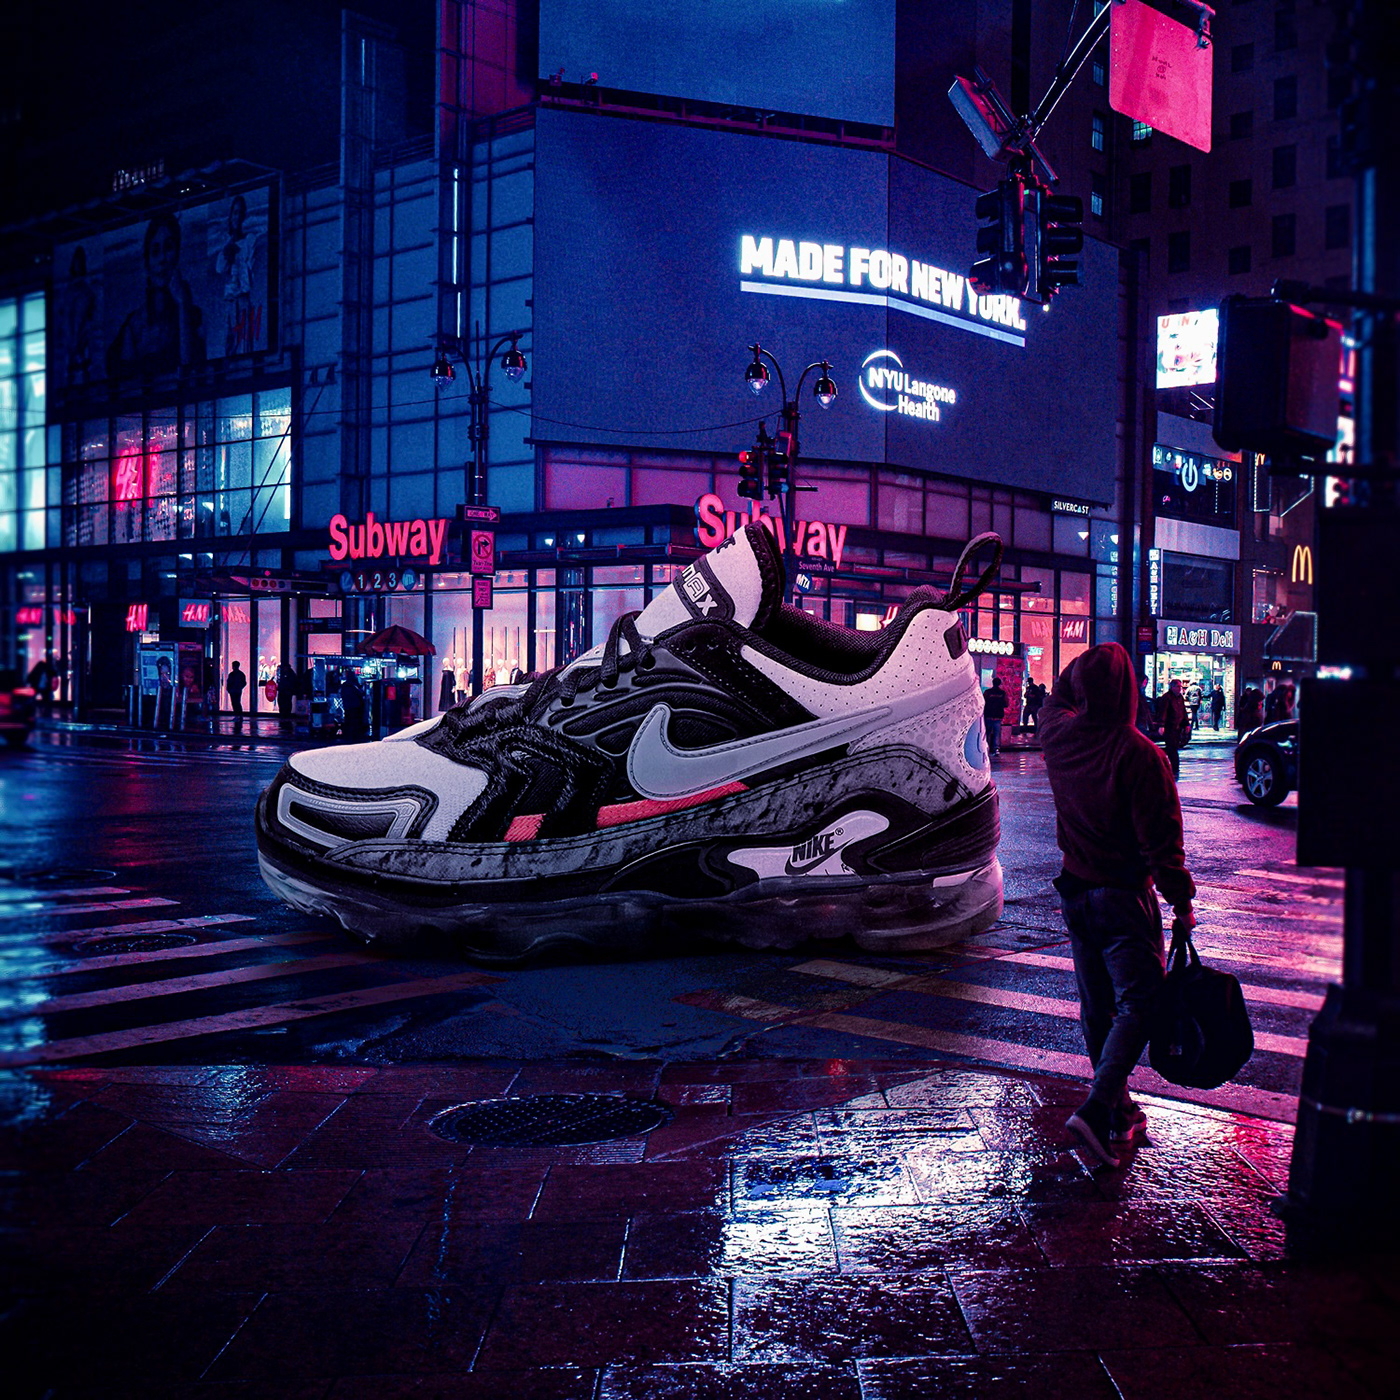 giant sneaker photo composite. retouching and image manipulation done with photoshop